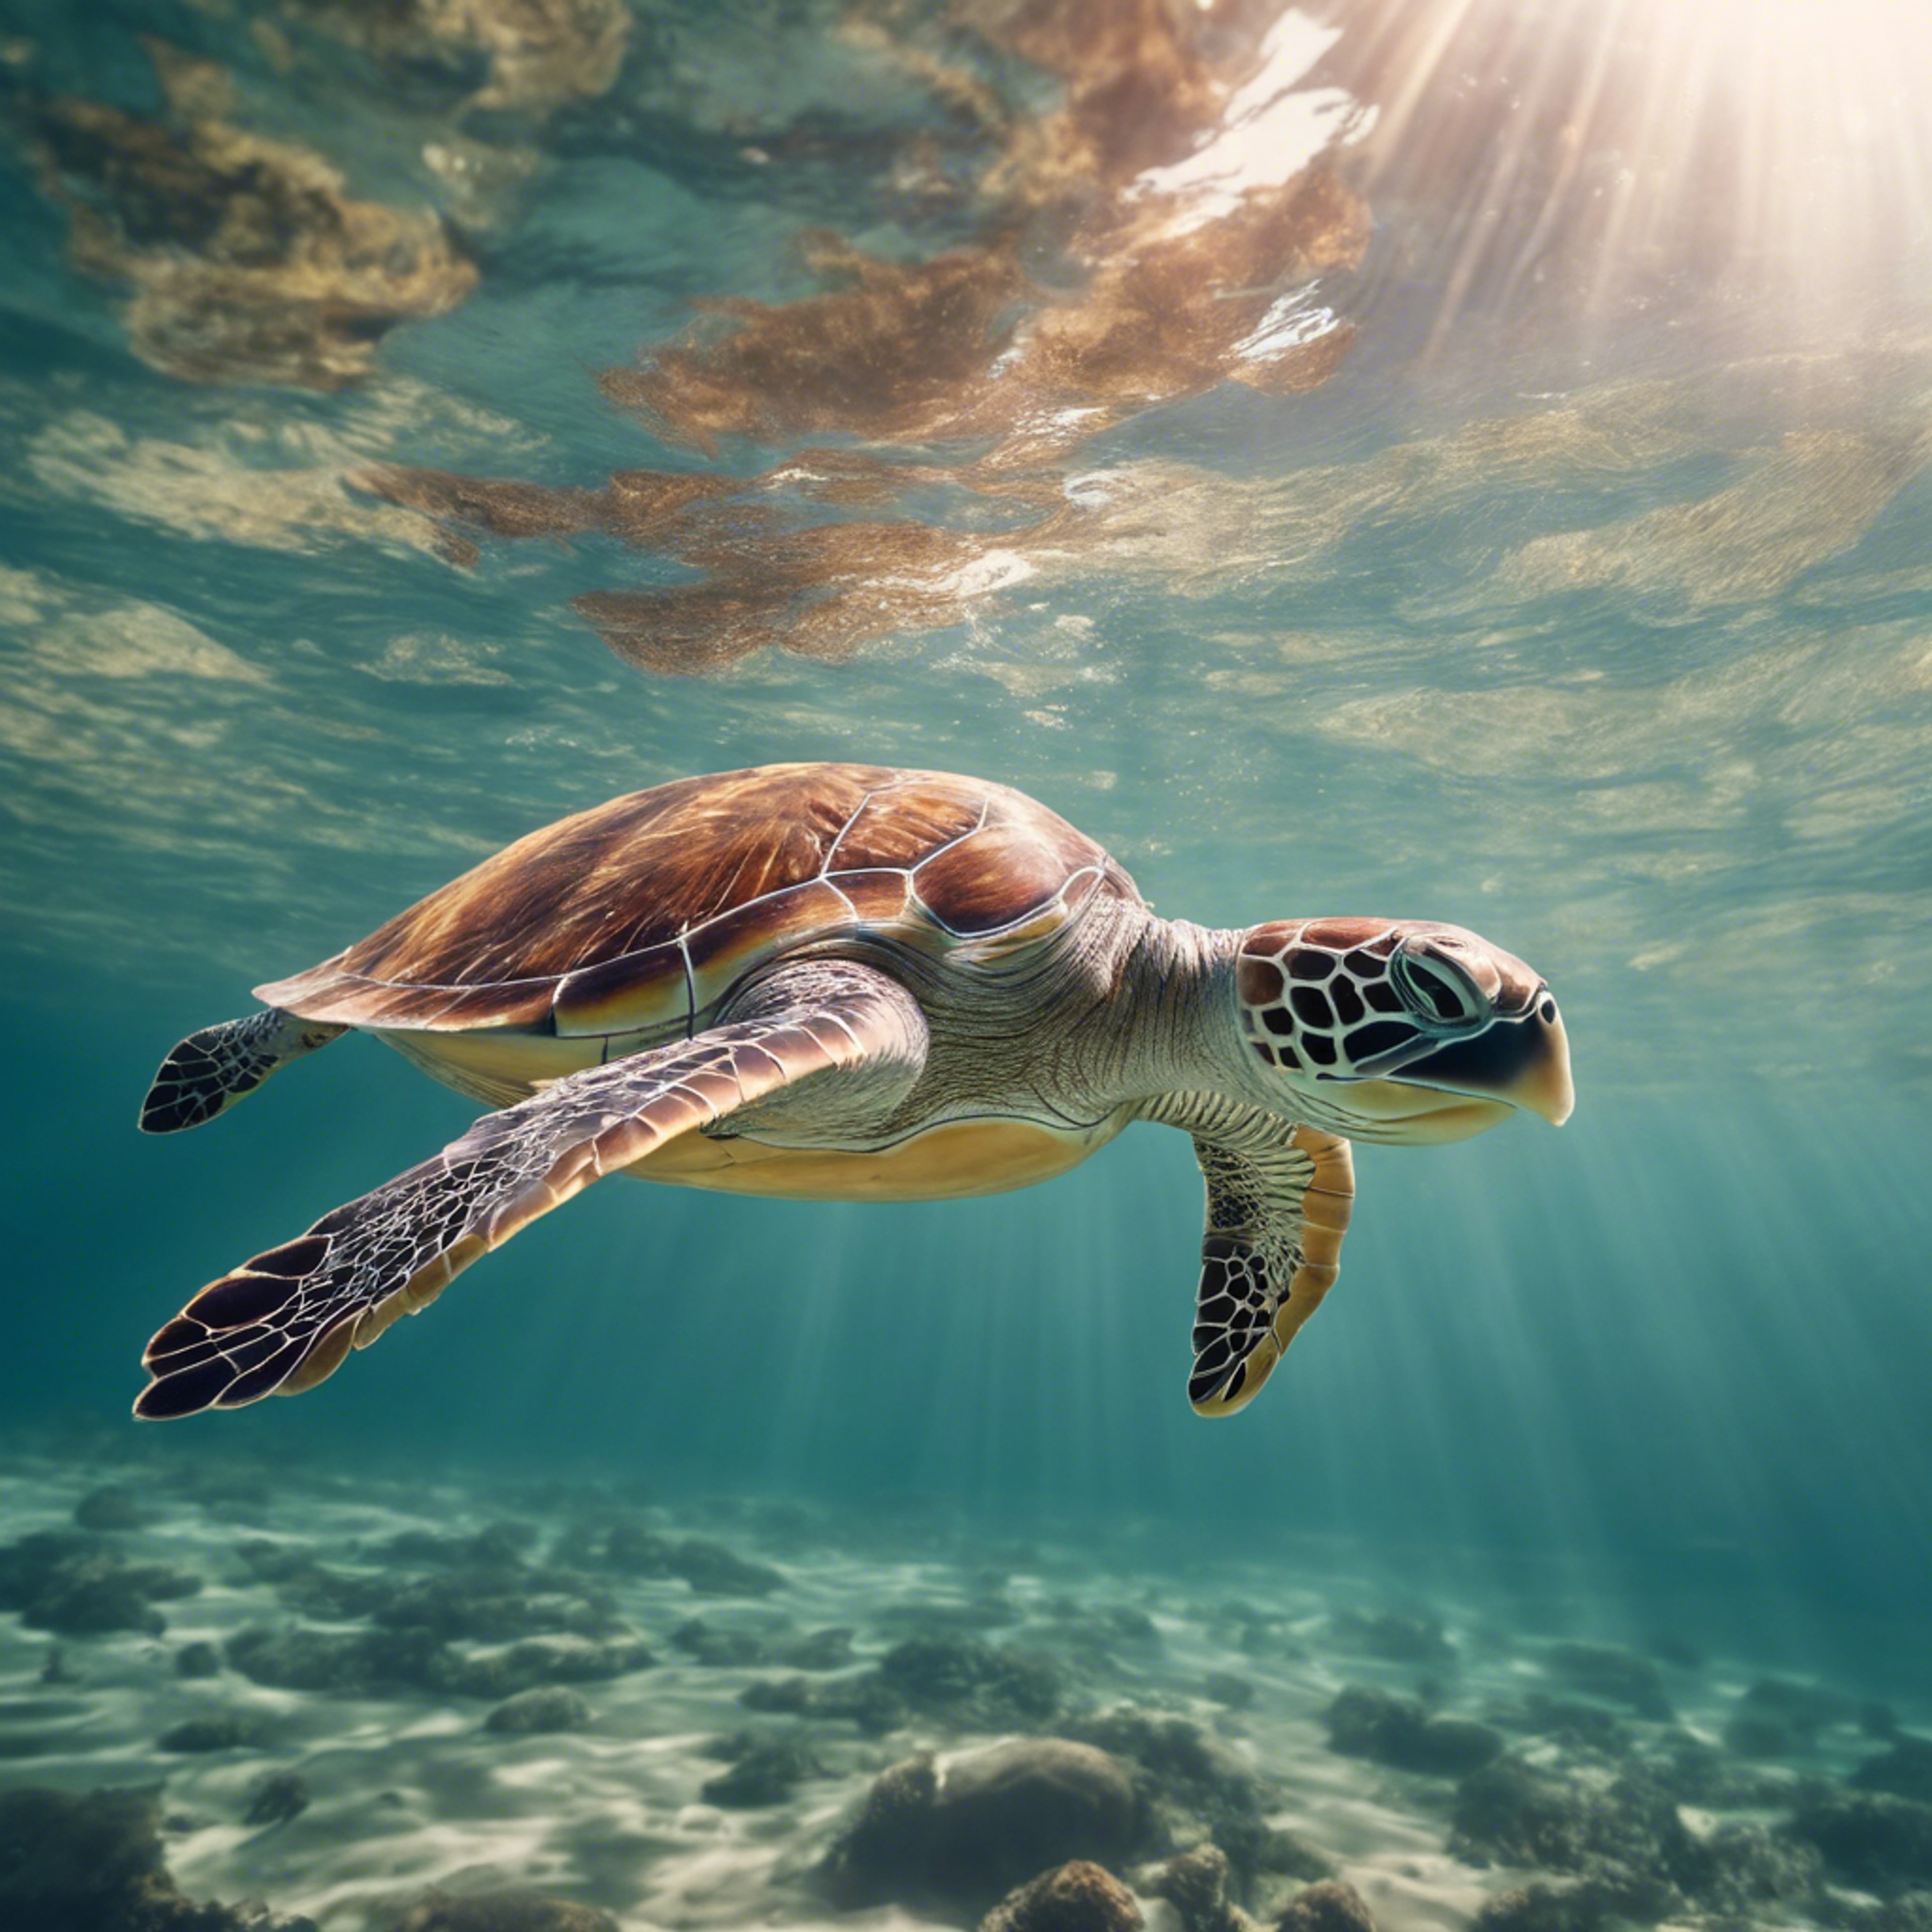 Sea turtle swimming leisurely in the ocean, with the sun penetrating the surface of the water above. 벽지[52b0564e310d4ce7b781]